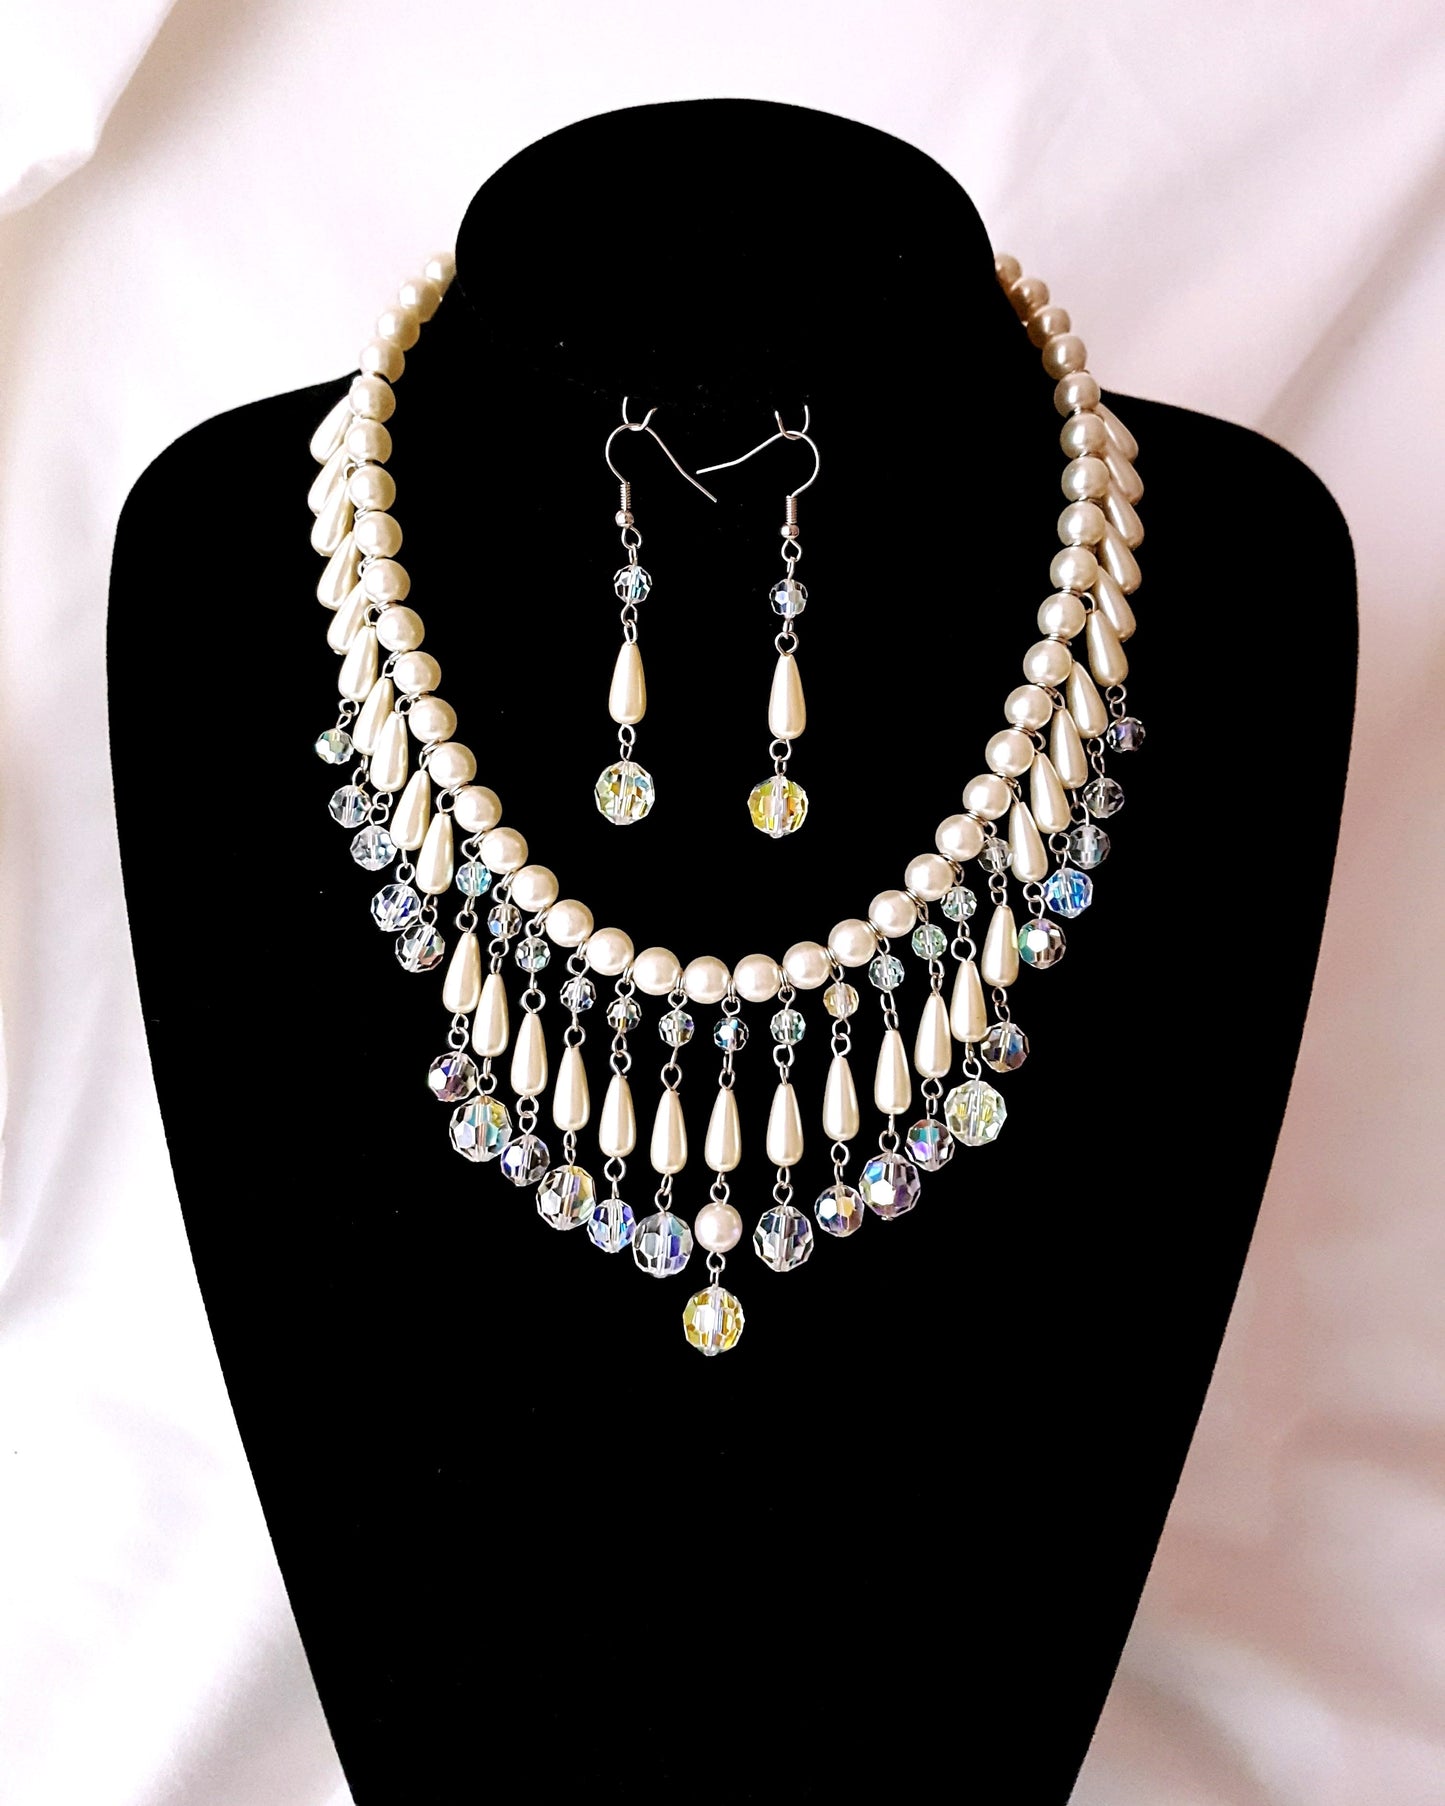 Pearl Crystal Elaborate Beaded Collar Necklace and Earring Set made with White Vintage Pearls and Clear AB Vintage Crystal